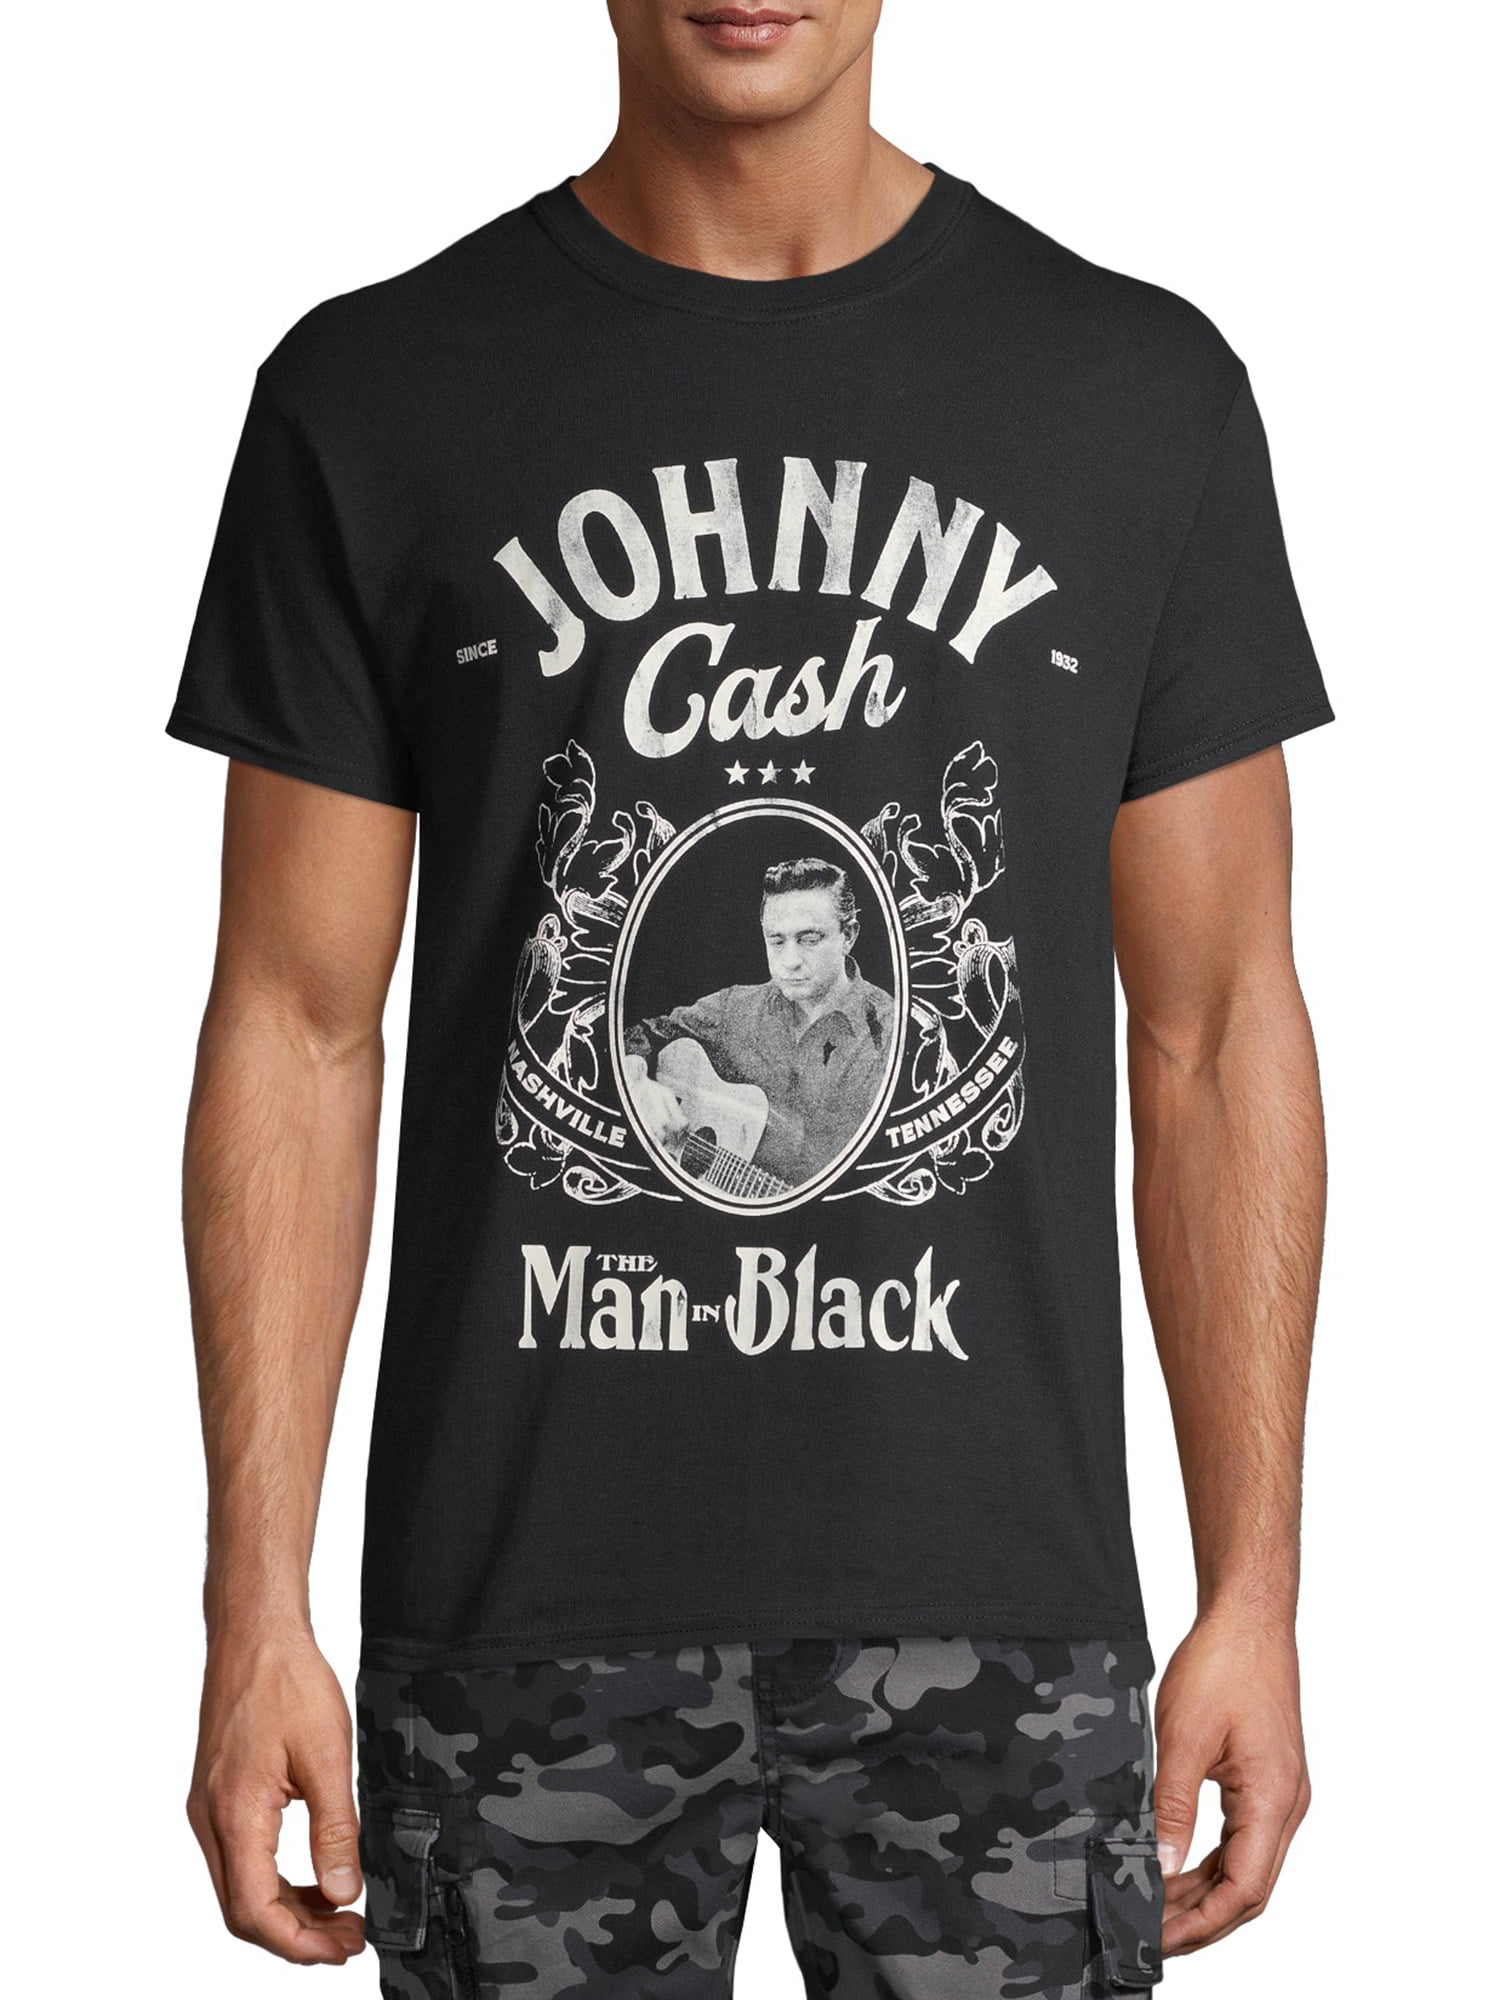 In Person Adult Mens T-Shirt Johnny Cash 